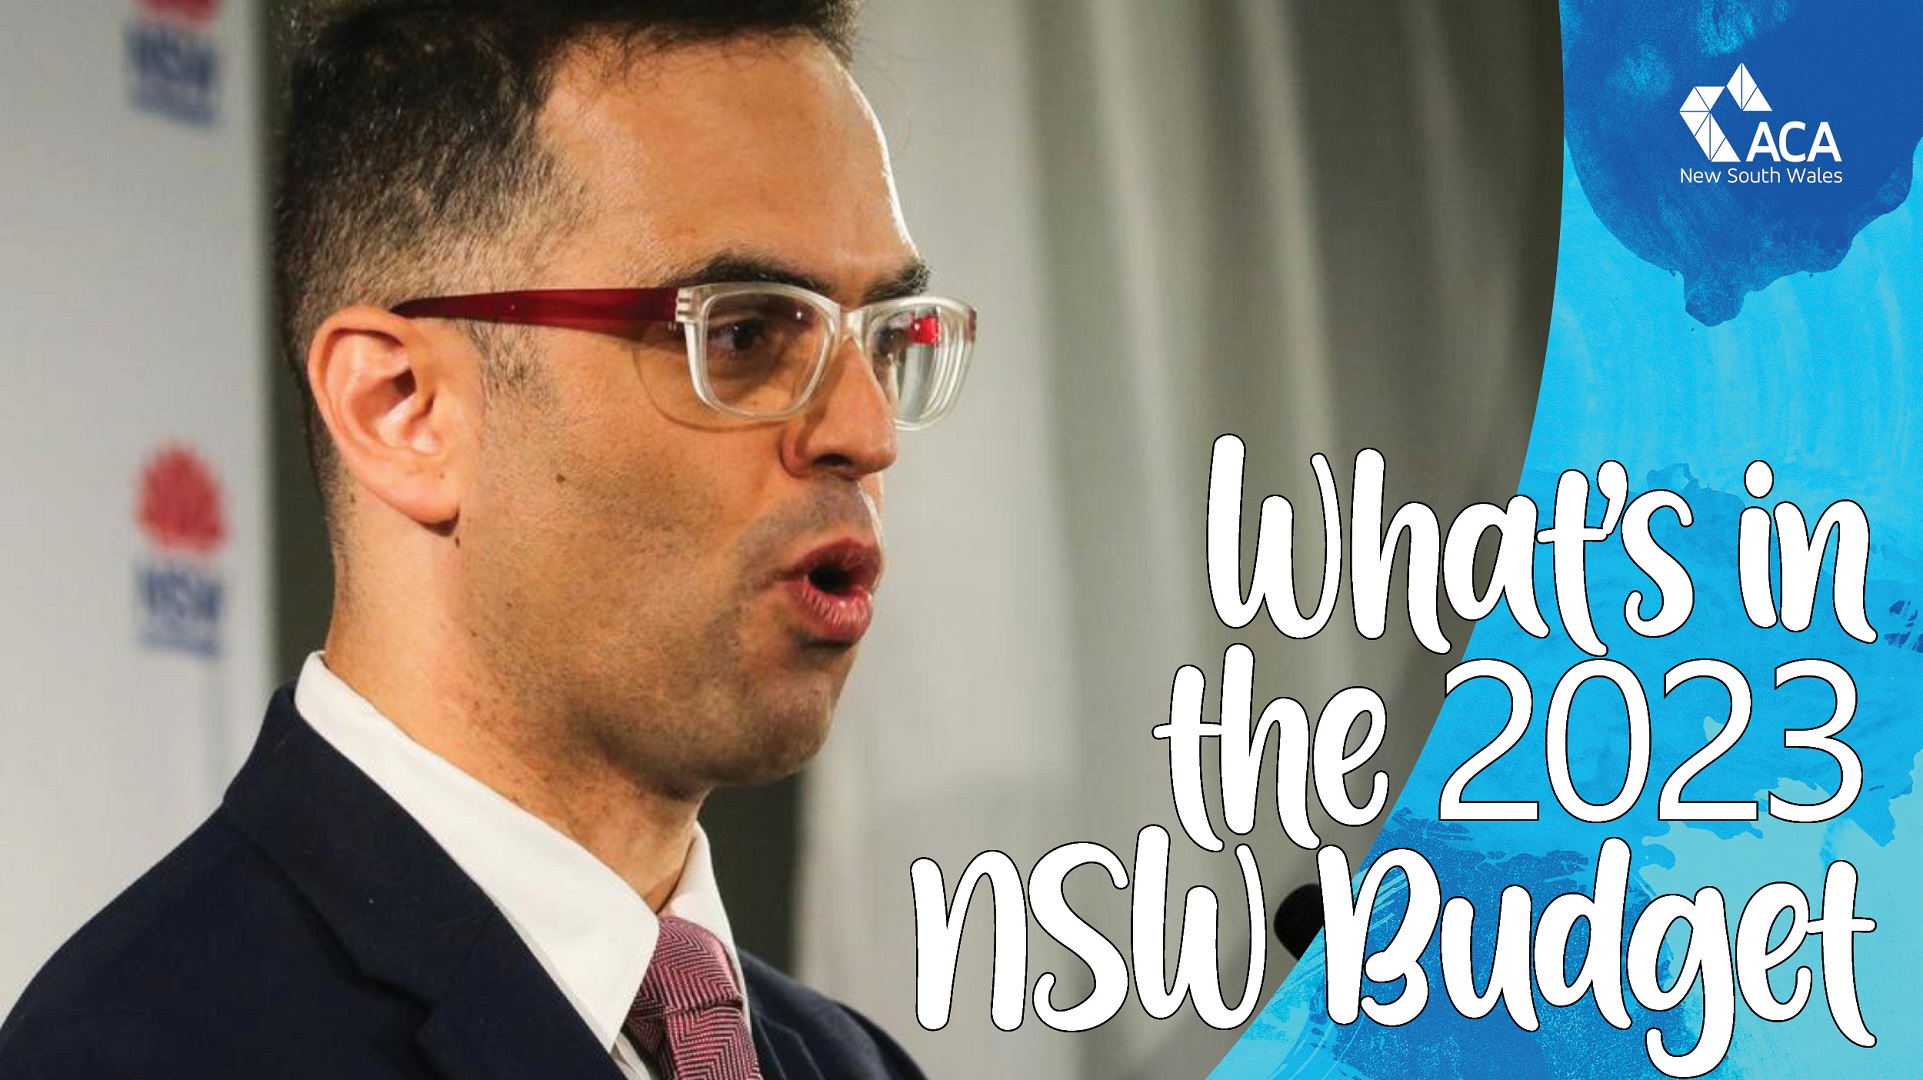 What was announced in the 2023-2024 NSW Budget?